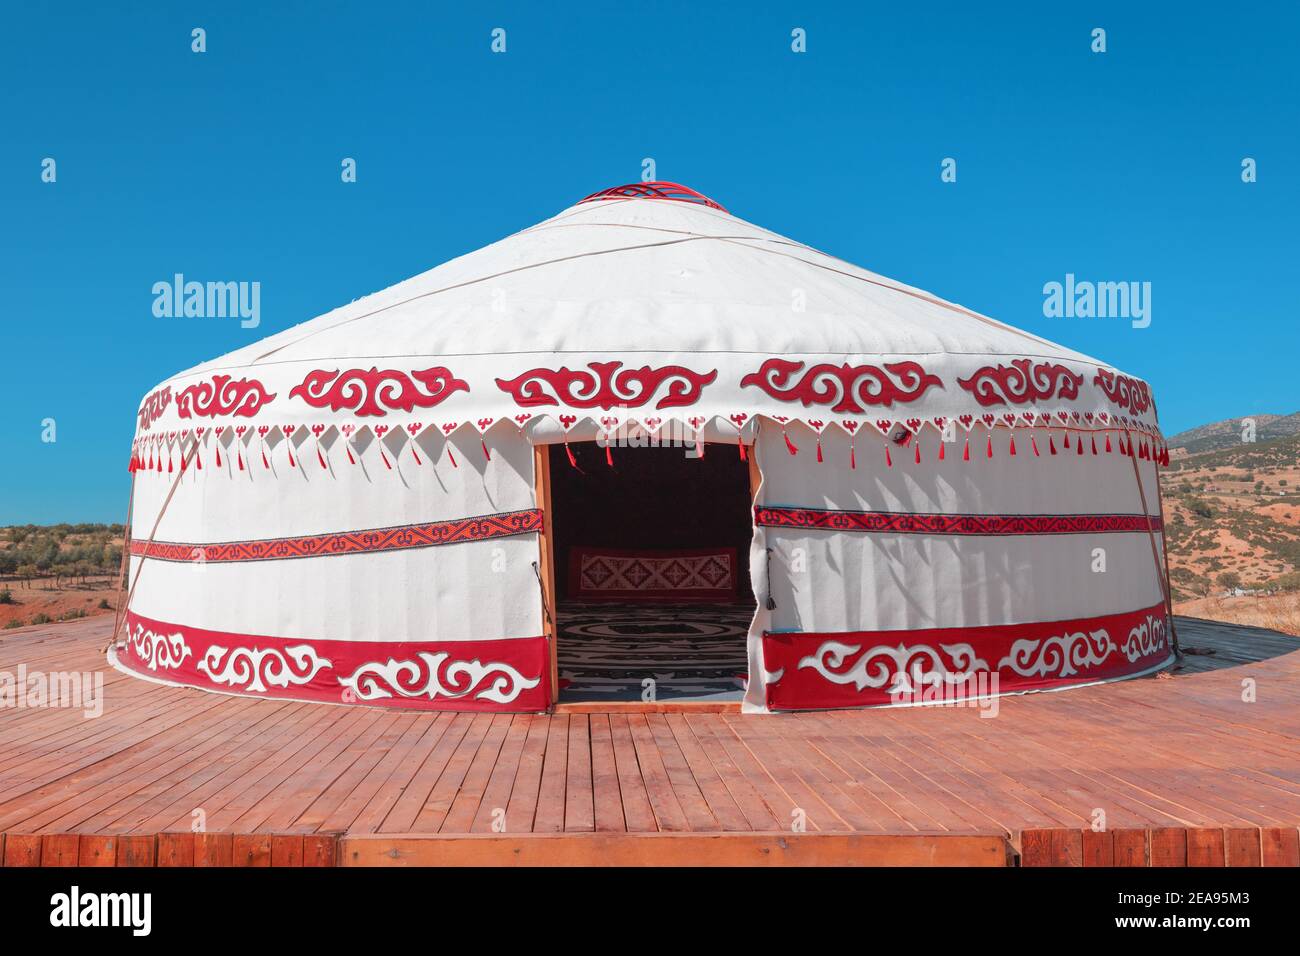 A Yurt is a portable tent house that occupies a Central place in the culture of Central Asian nomadic peoples. Ethnic and folk patterns for home decor Stock Photo